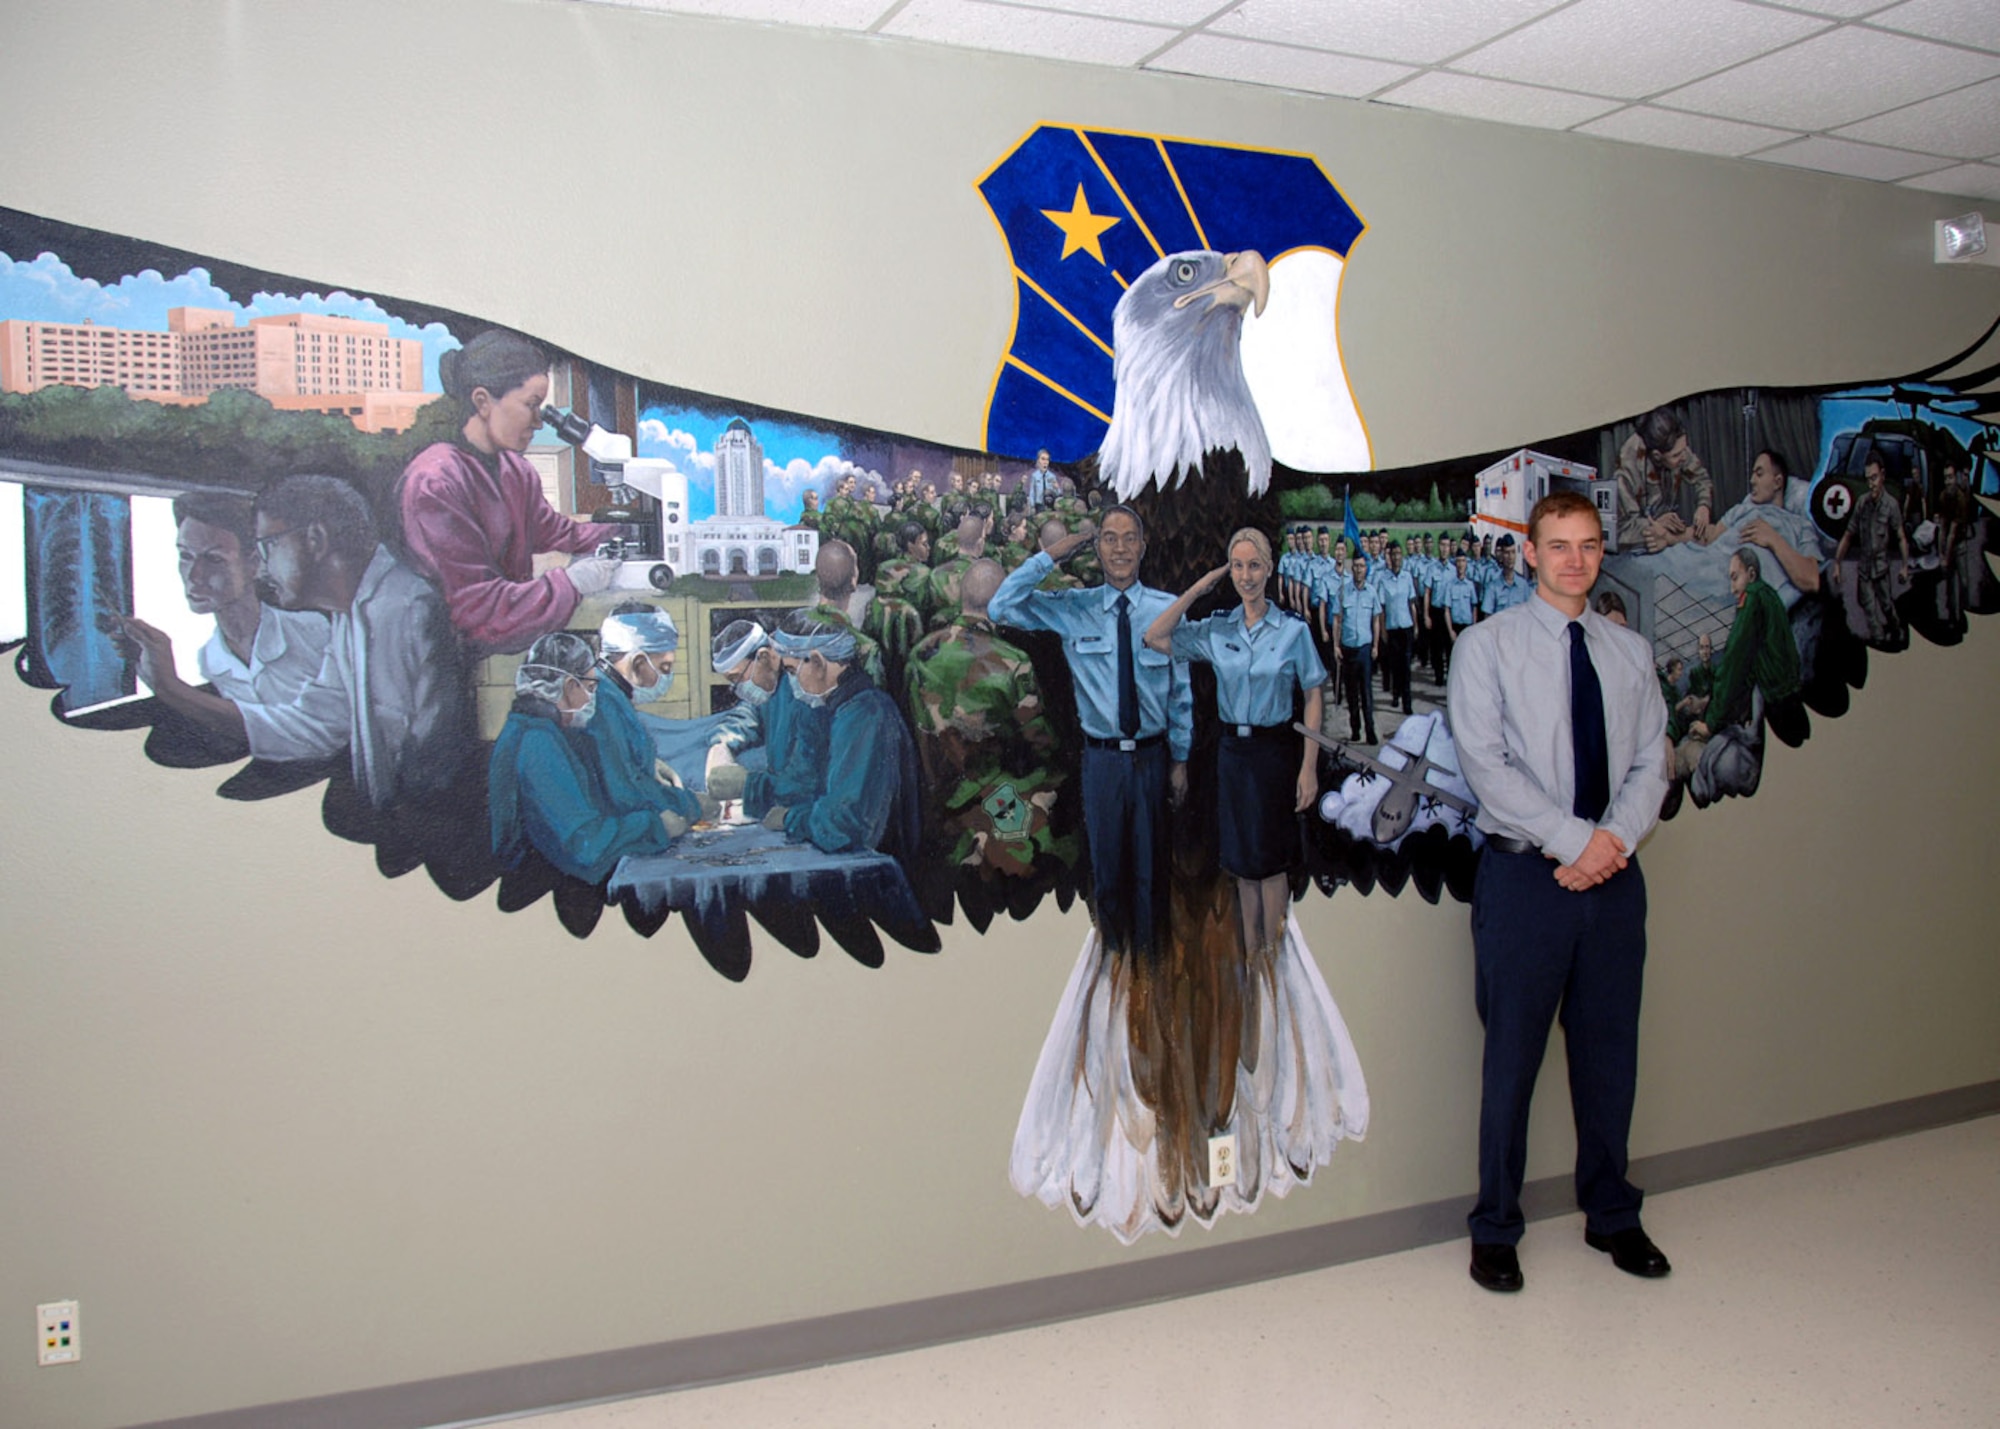 Artist Jacob Galey, husband of Capt. Lisa Mull a psychology resident with the 59th Medical Operations Squadron, stands beside his artwork April 24 at Camp Rissington, on Lackland Air Force Base, Texas. The mural, a first for Mr. Galey, took 180 hours in more than a three-month time period. (U.S. Air Force photo/Staff Sgt. Ruth Stanley)